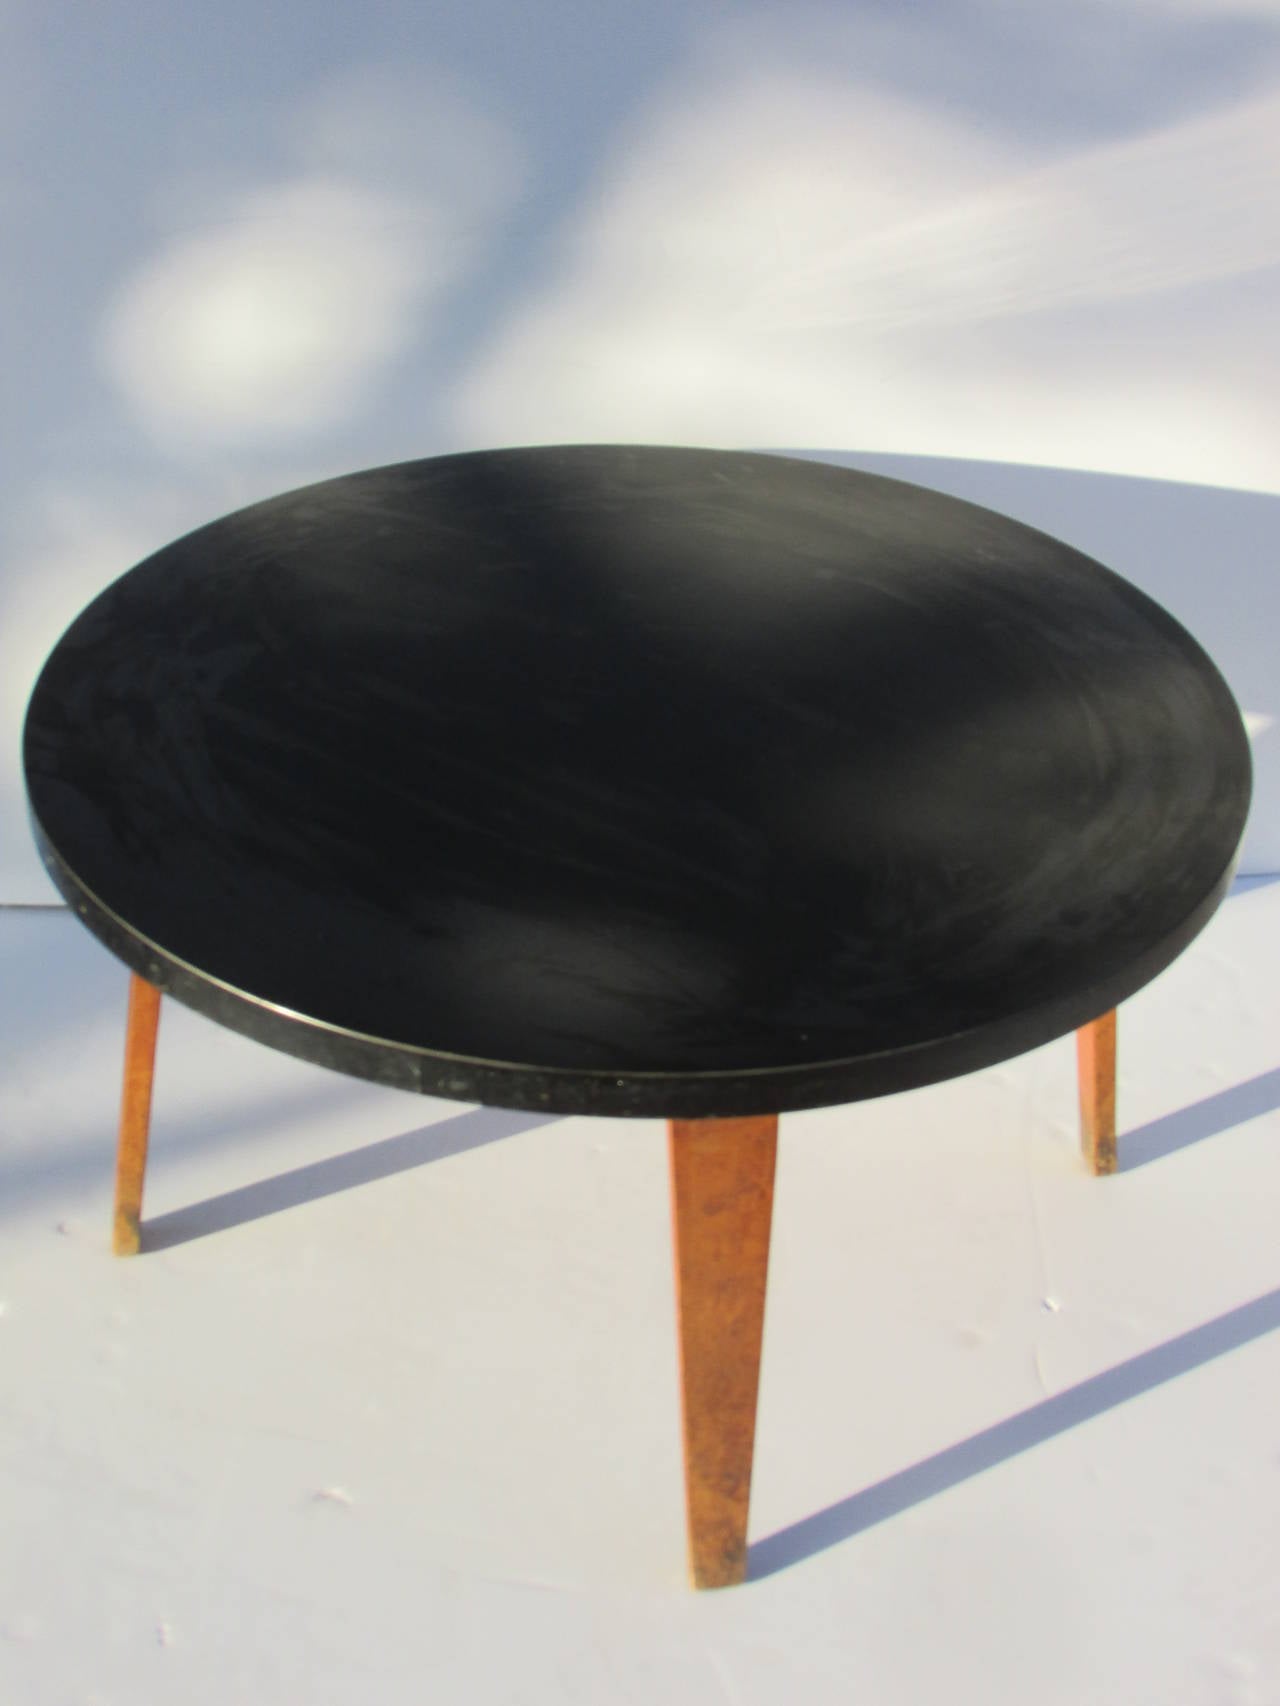 An all original vintage Thonet bentwood coffee / occasional table measuring 16 inches high with a 30 inch diameter round black bakelite  type laminate top - circa 1940s.